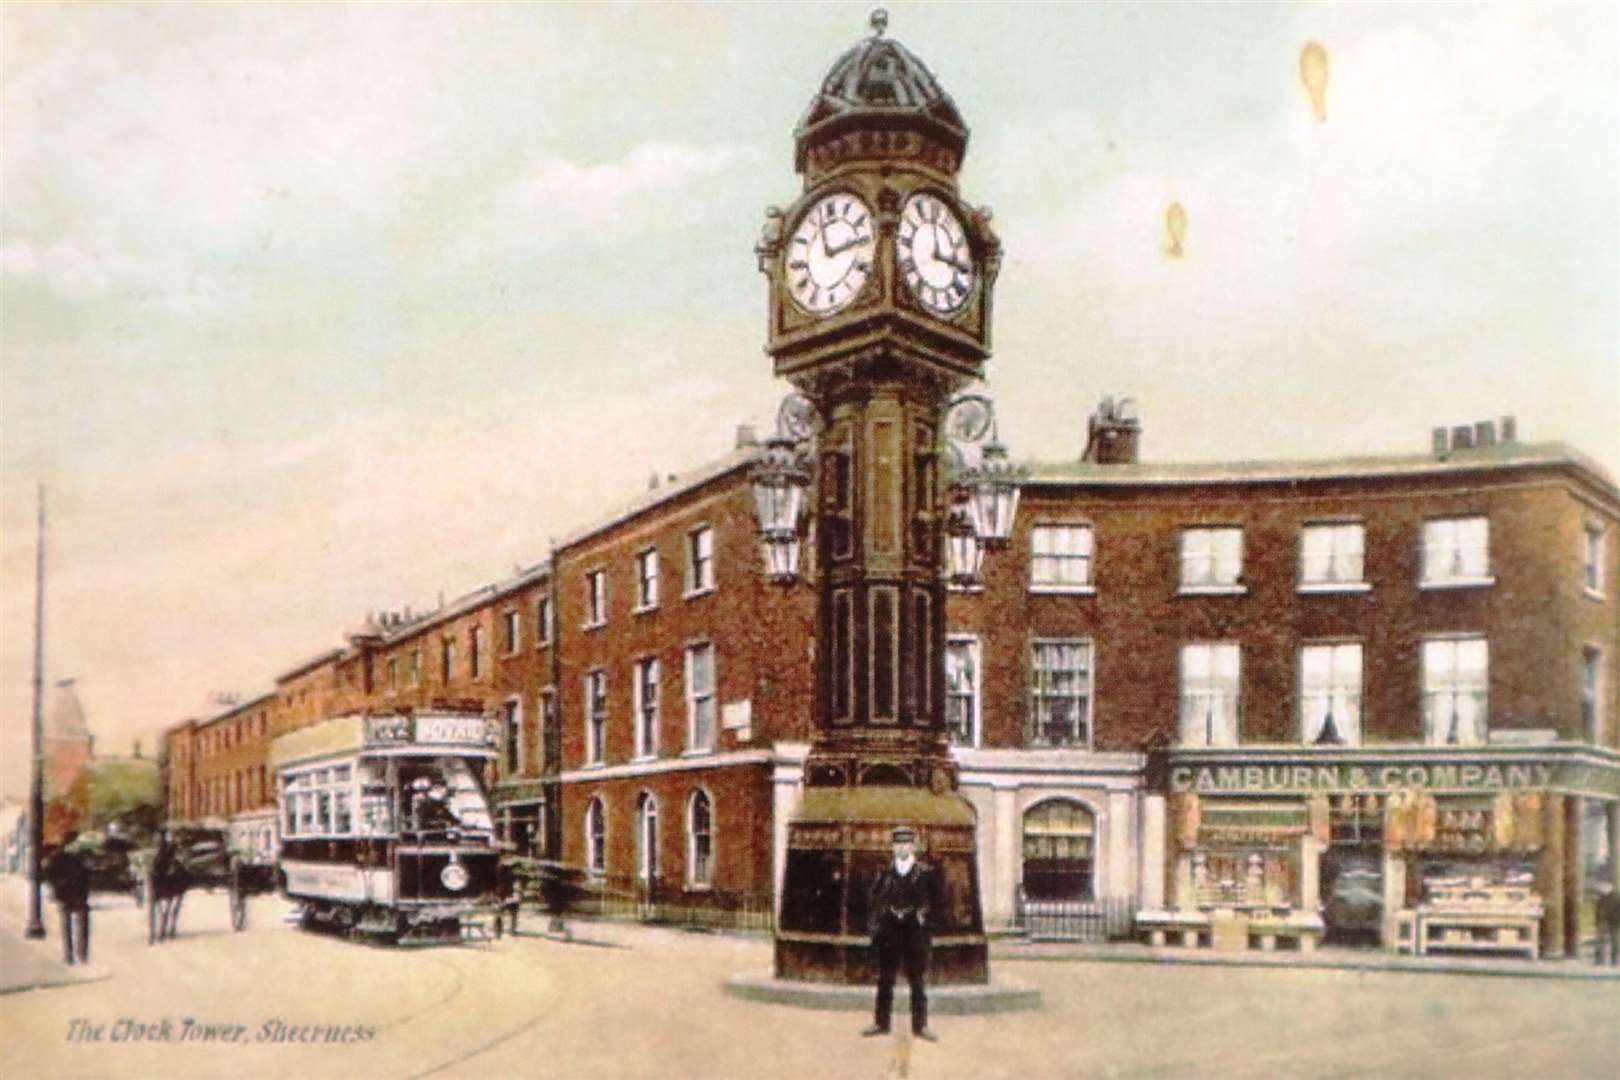 Sheerness clock tower and trams around 1903. Picture: A History of Sheppey in Pictures by Chris Reed